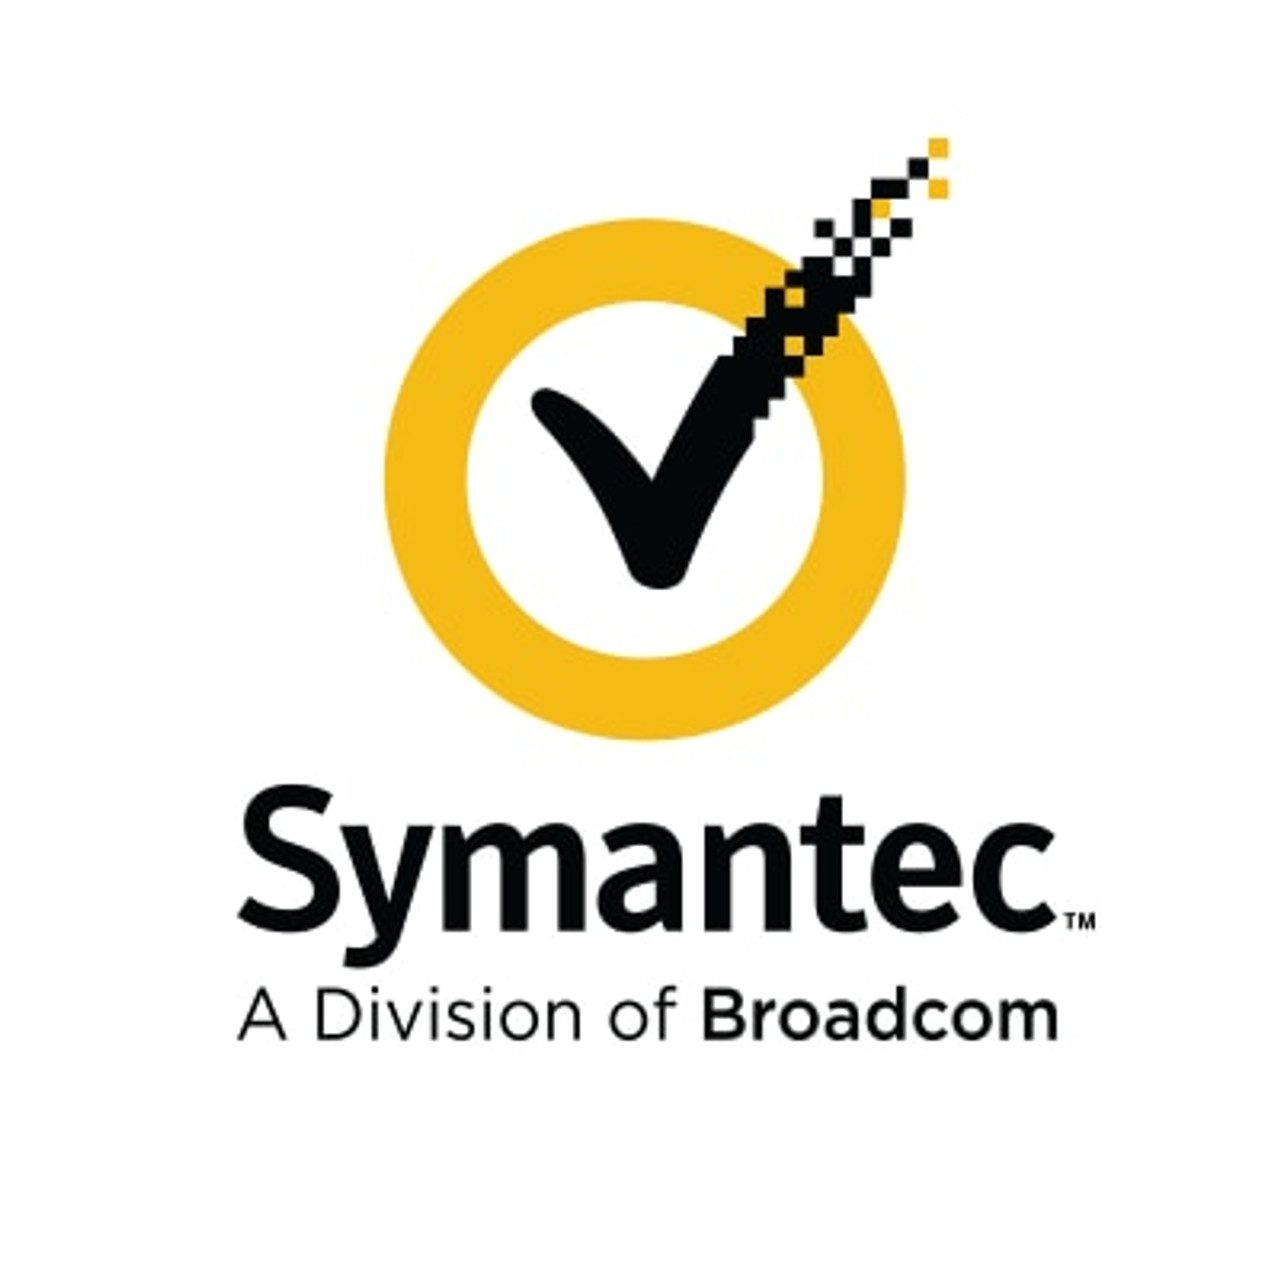 Symantec Complete Endpoint Defense (without SEP), Initial Hybrid Subscription License with Support, 5,000-9,999 Devices 3 YR